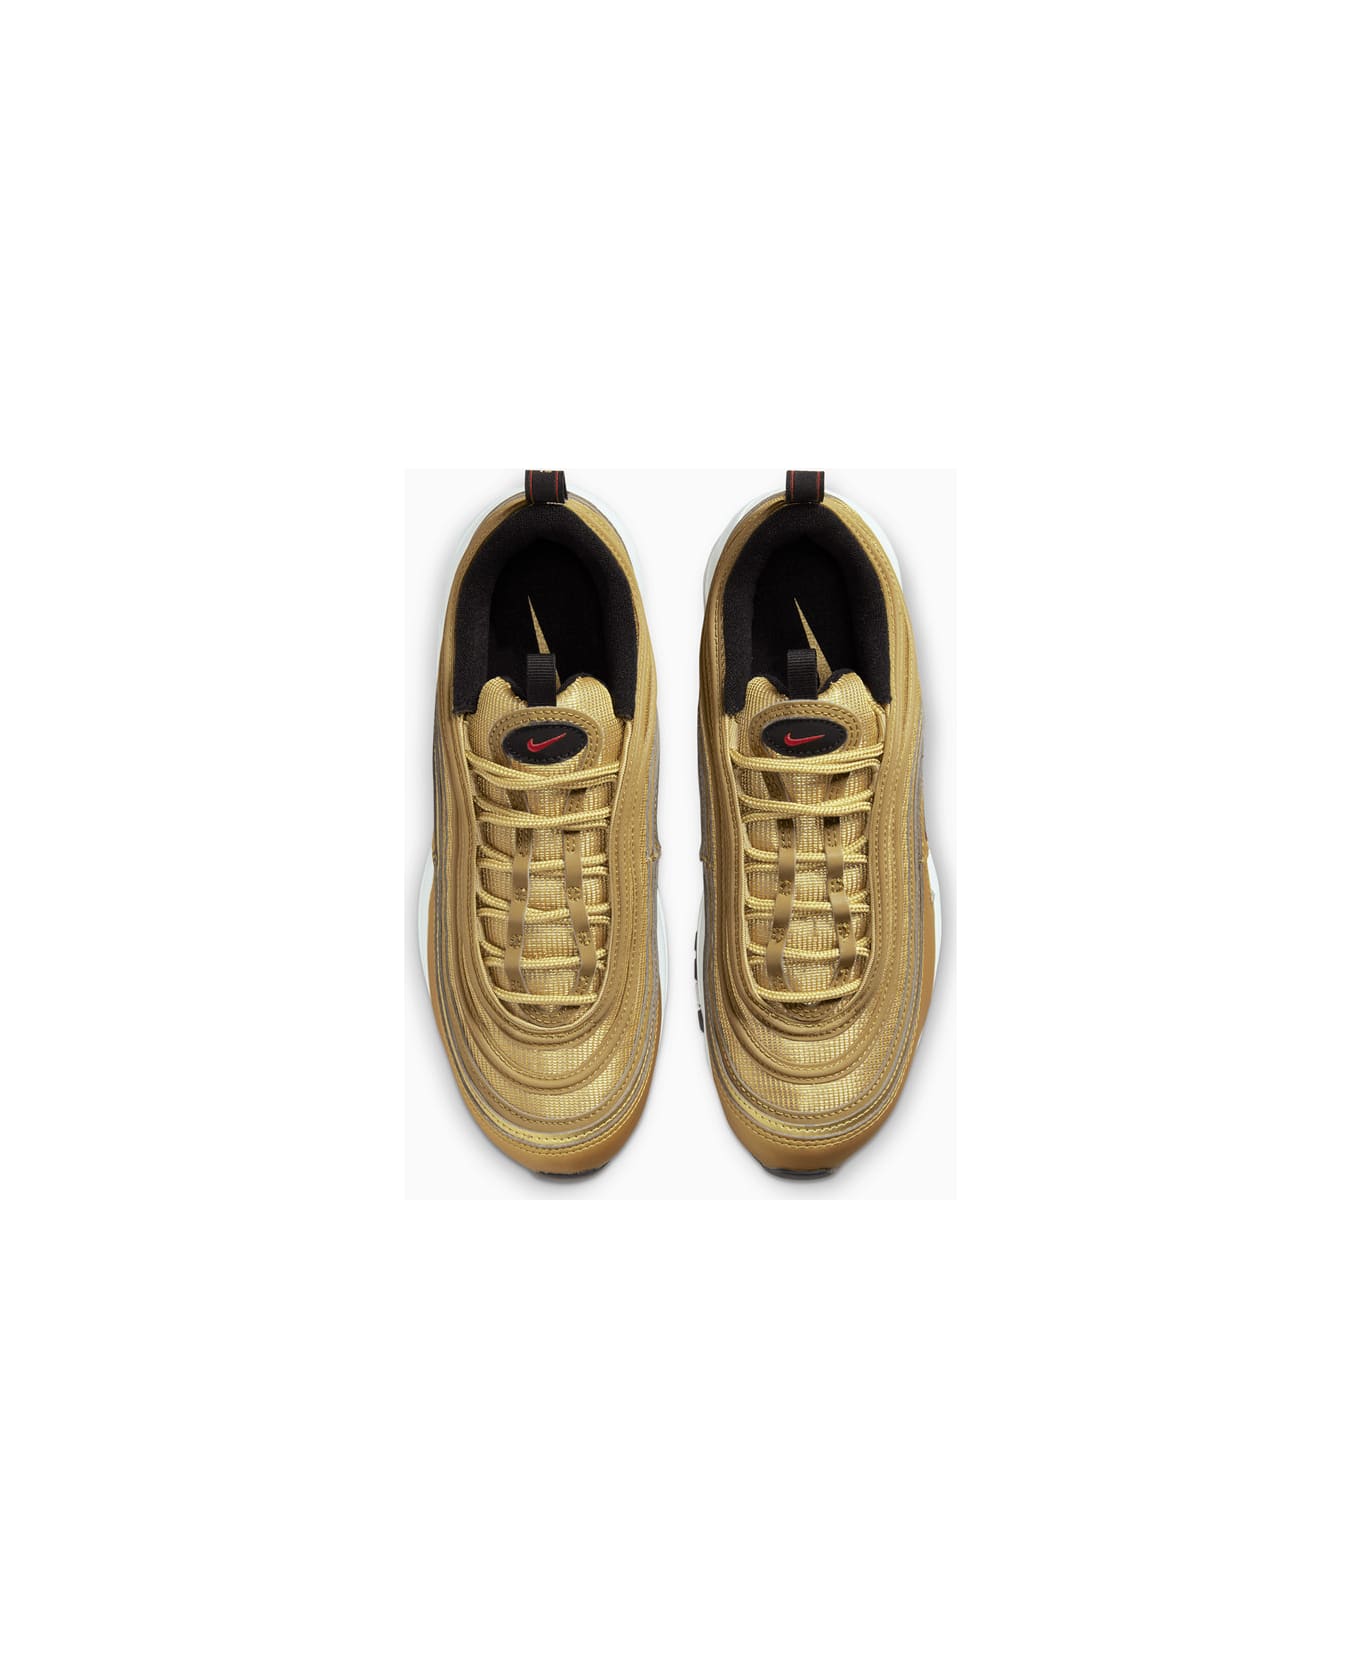 Nike Air Max 97 Og 'gold' Sneakers Dq9131-700 - Gold スニーカー